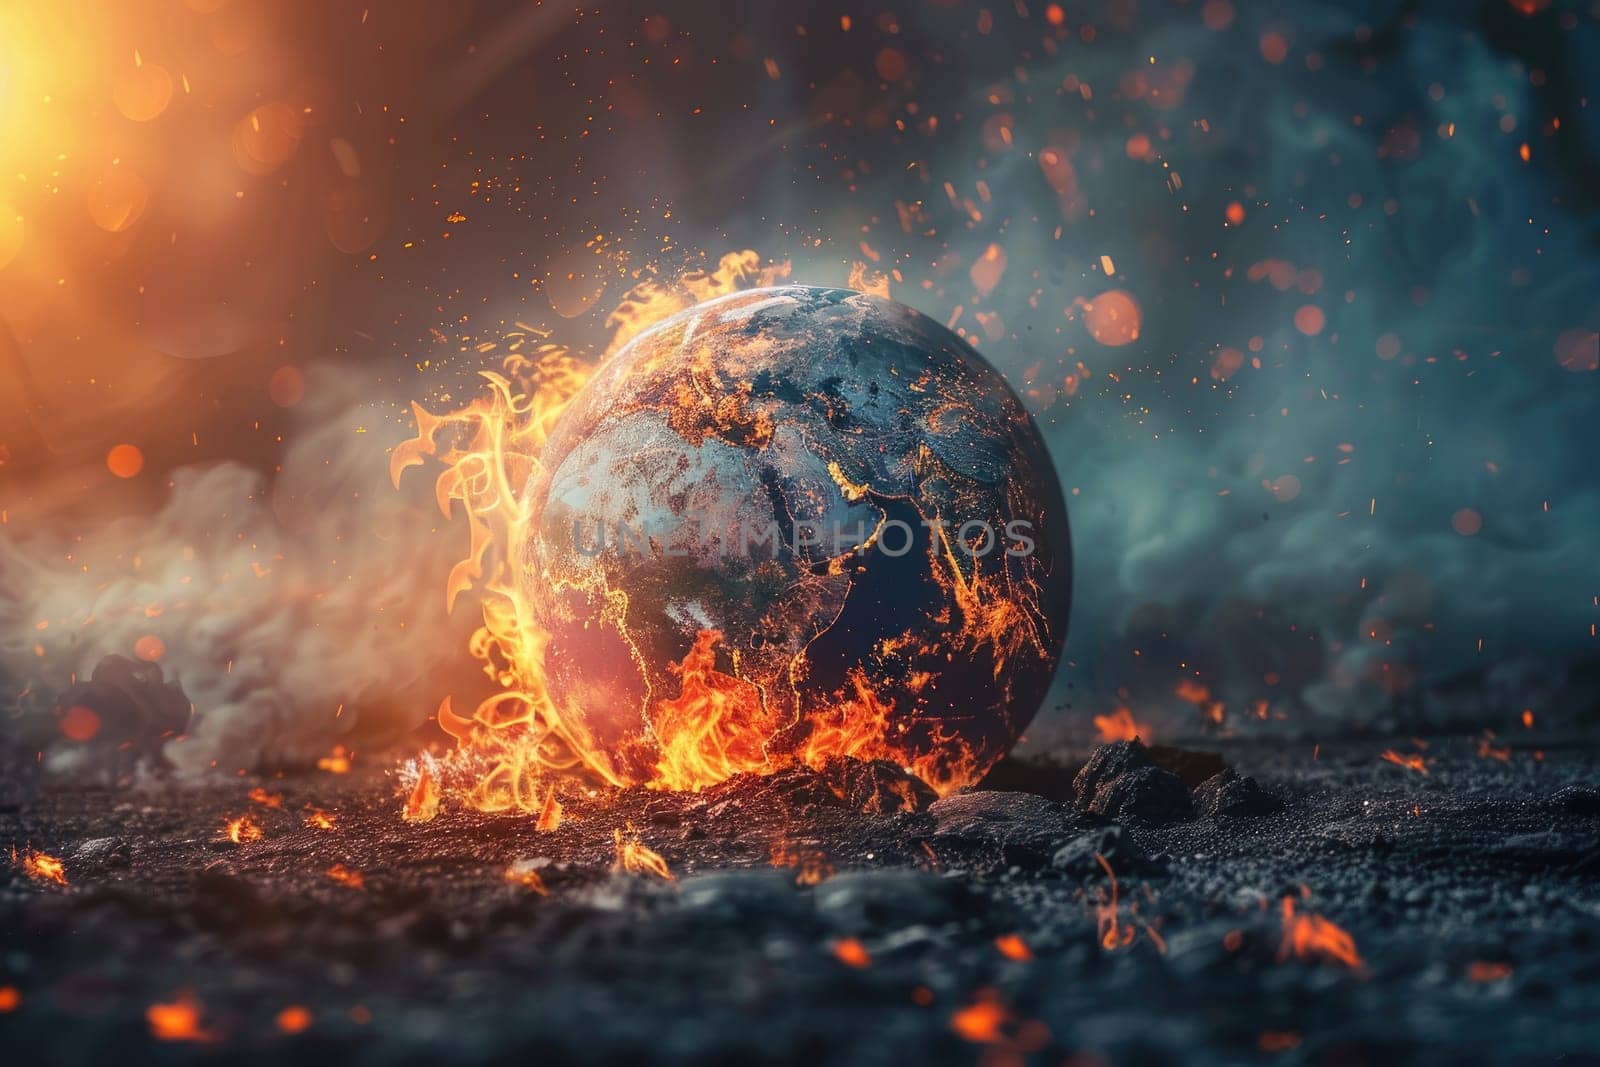 A fire-ravaged planet with a large, glowing ball of fire in the center, Global warming concept.